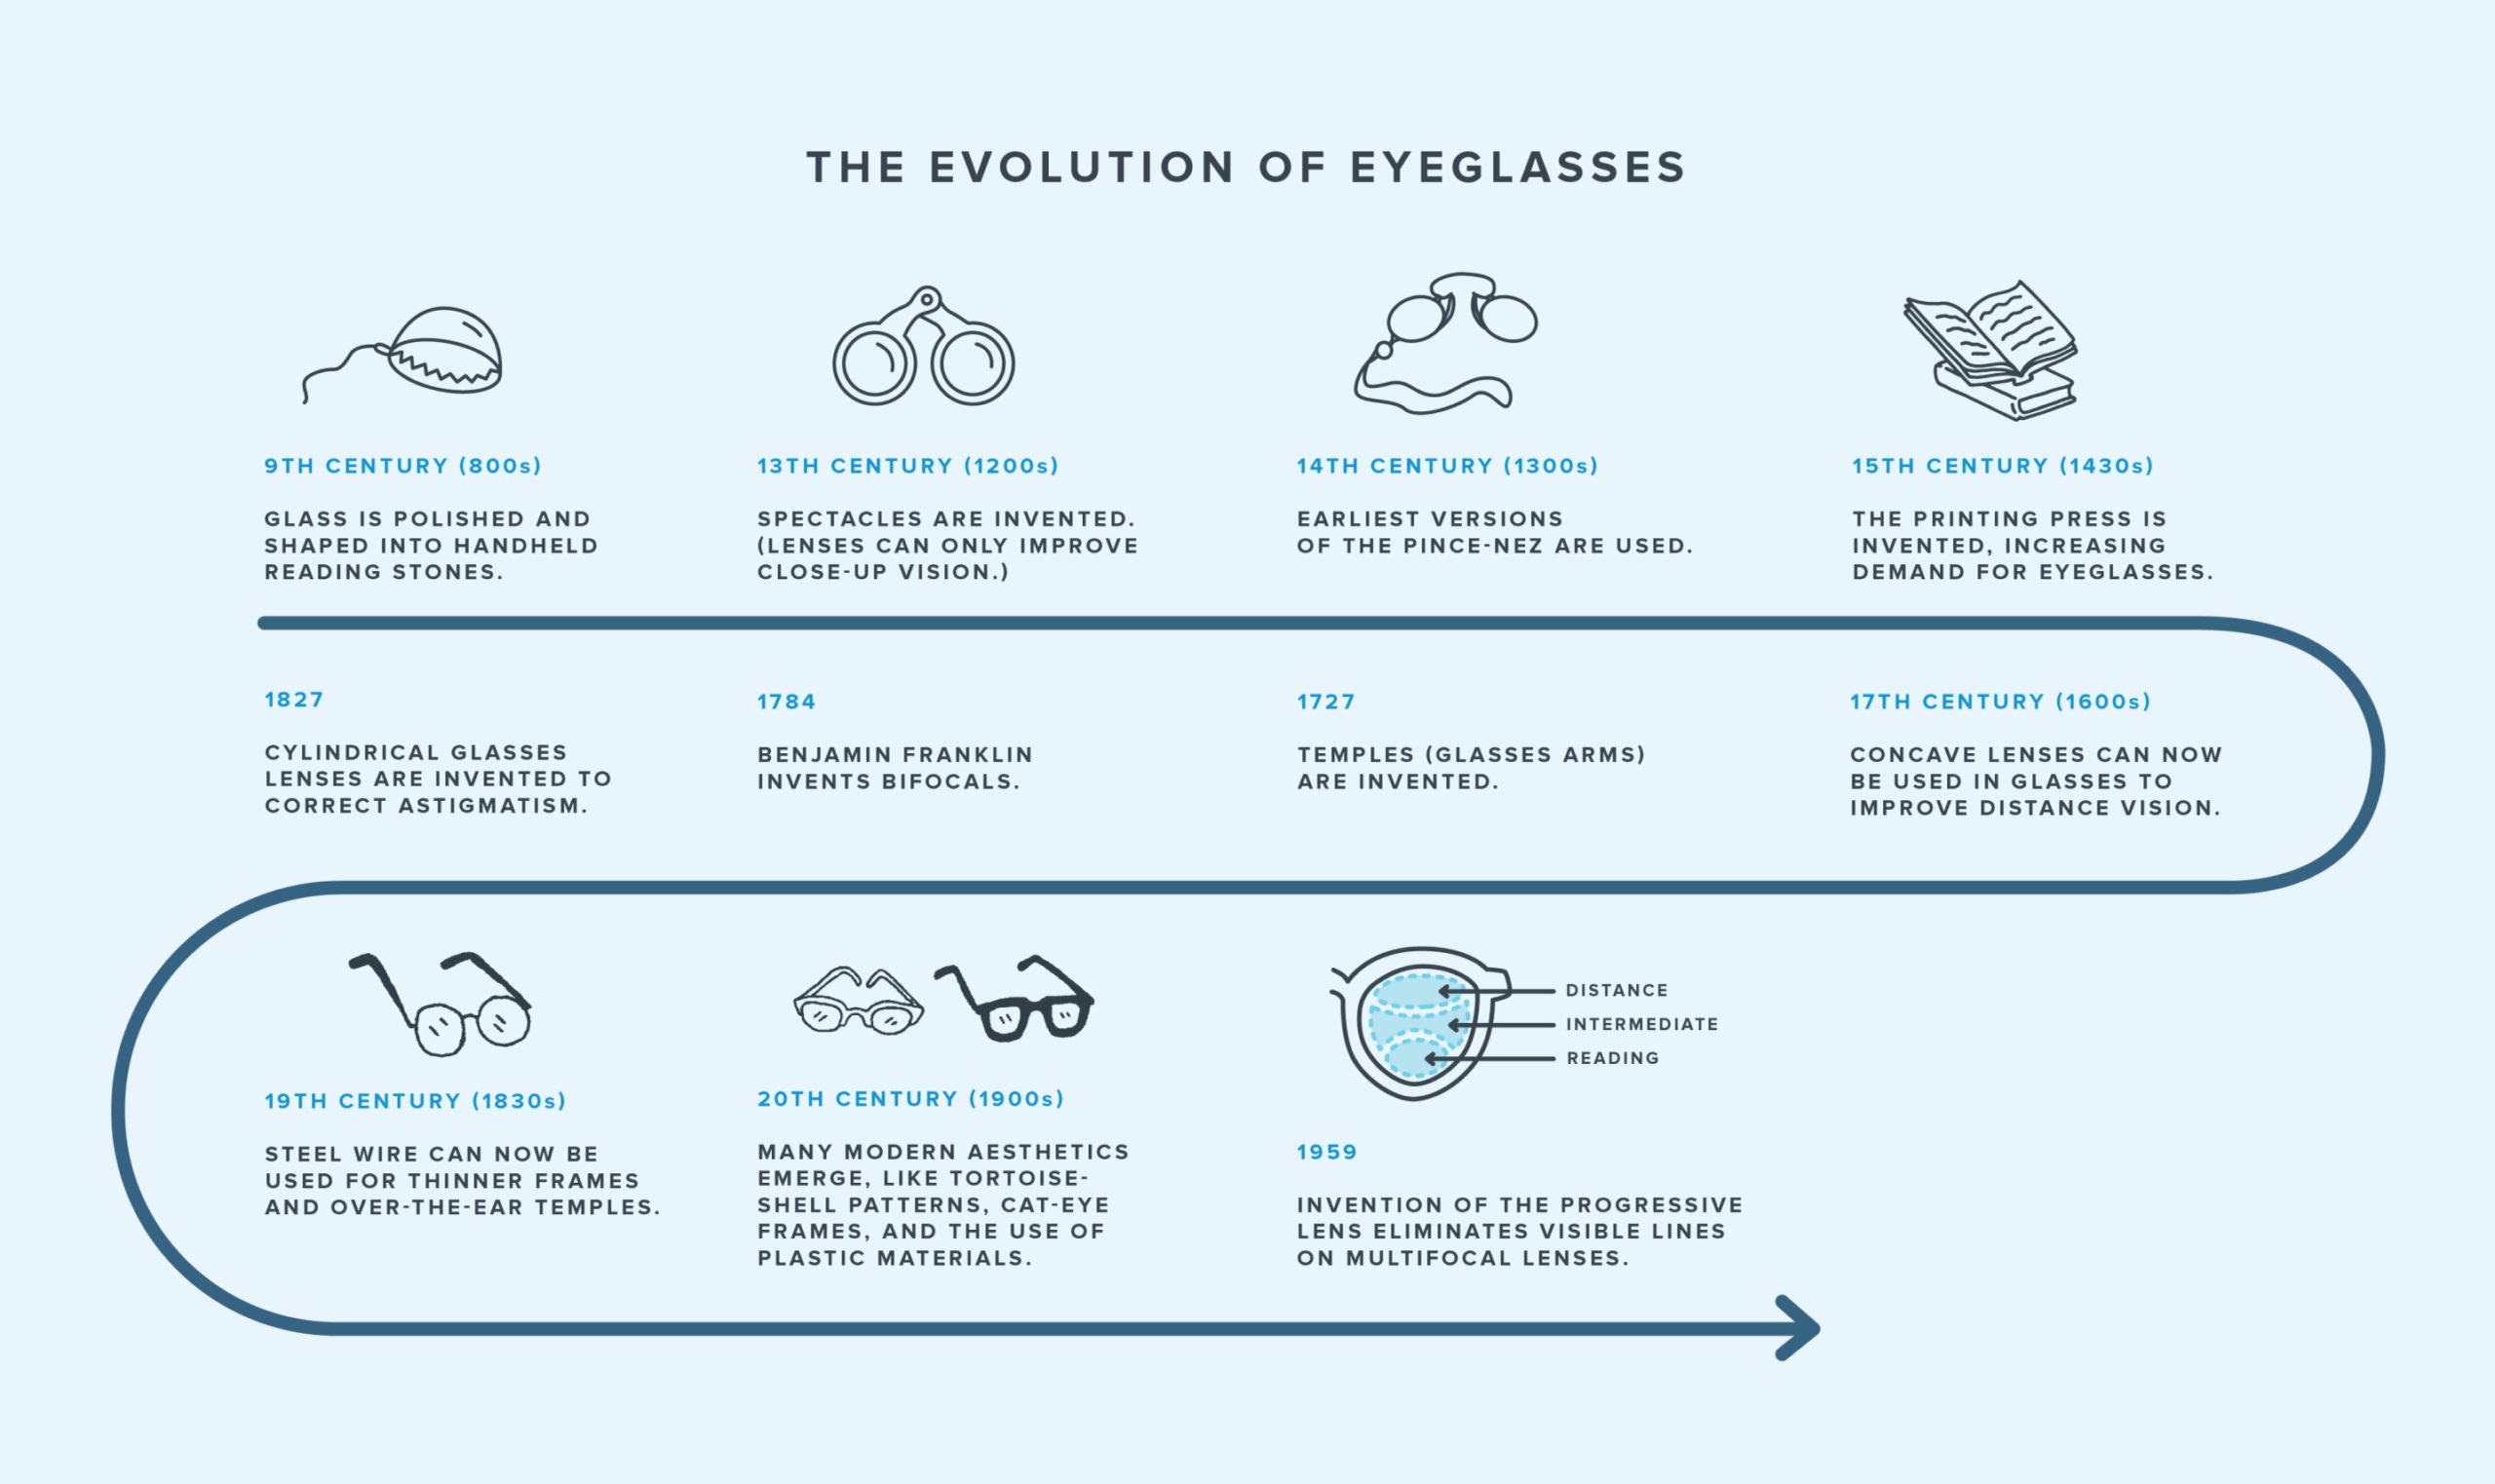 Timeline showing important milestones throughout the evolution of glasses